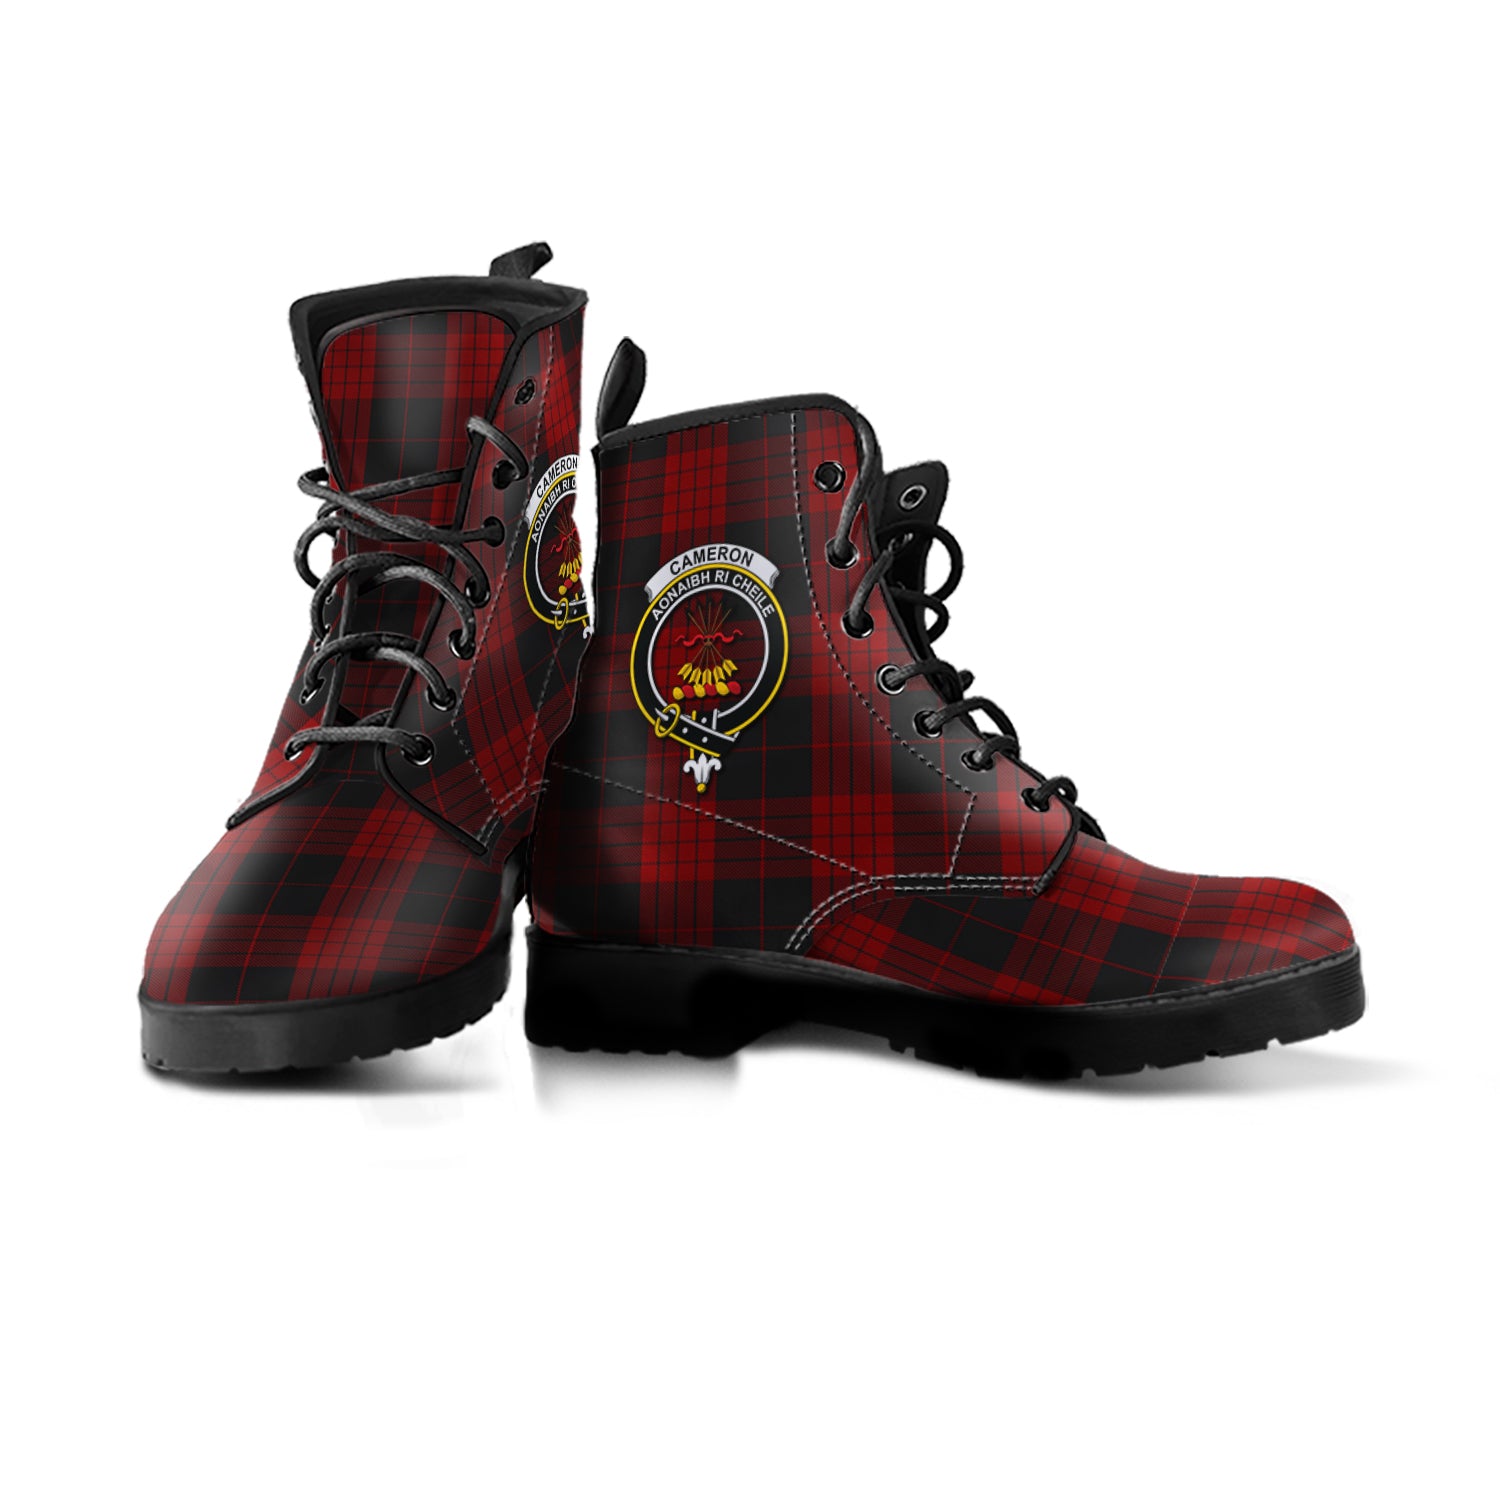 scottish-cameron-black-and-red-clan-crest-tartan-leather-boots